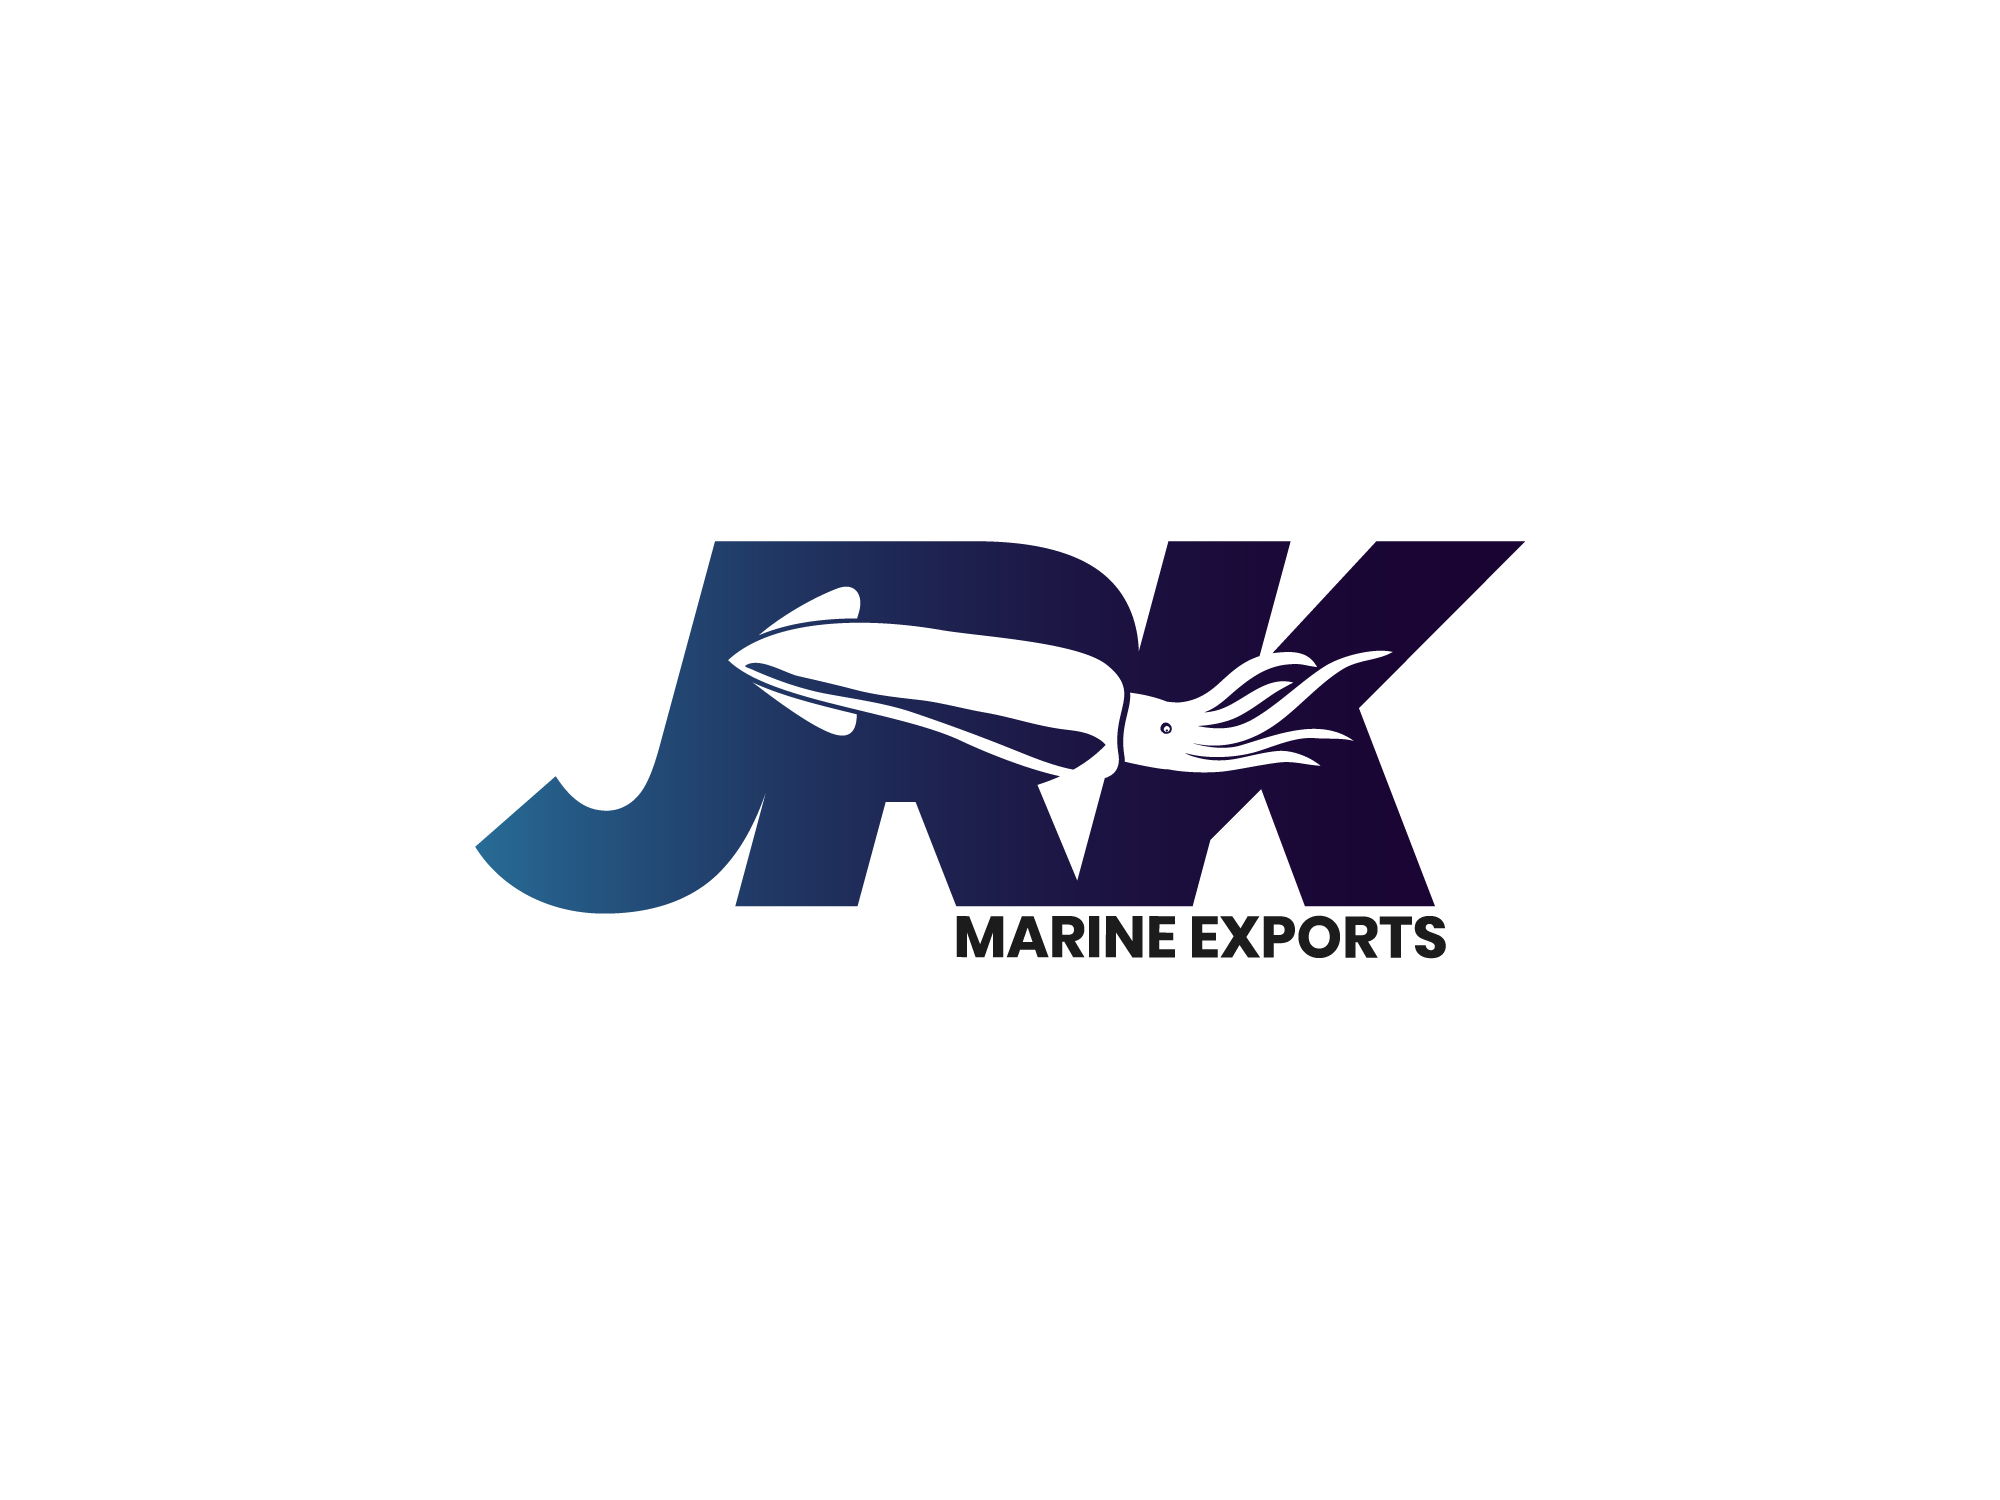 JRK - XpertLab Technologies Private Limited